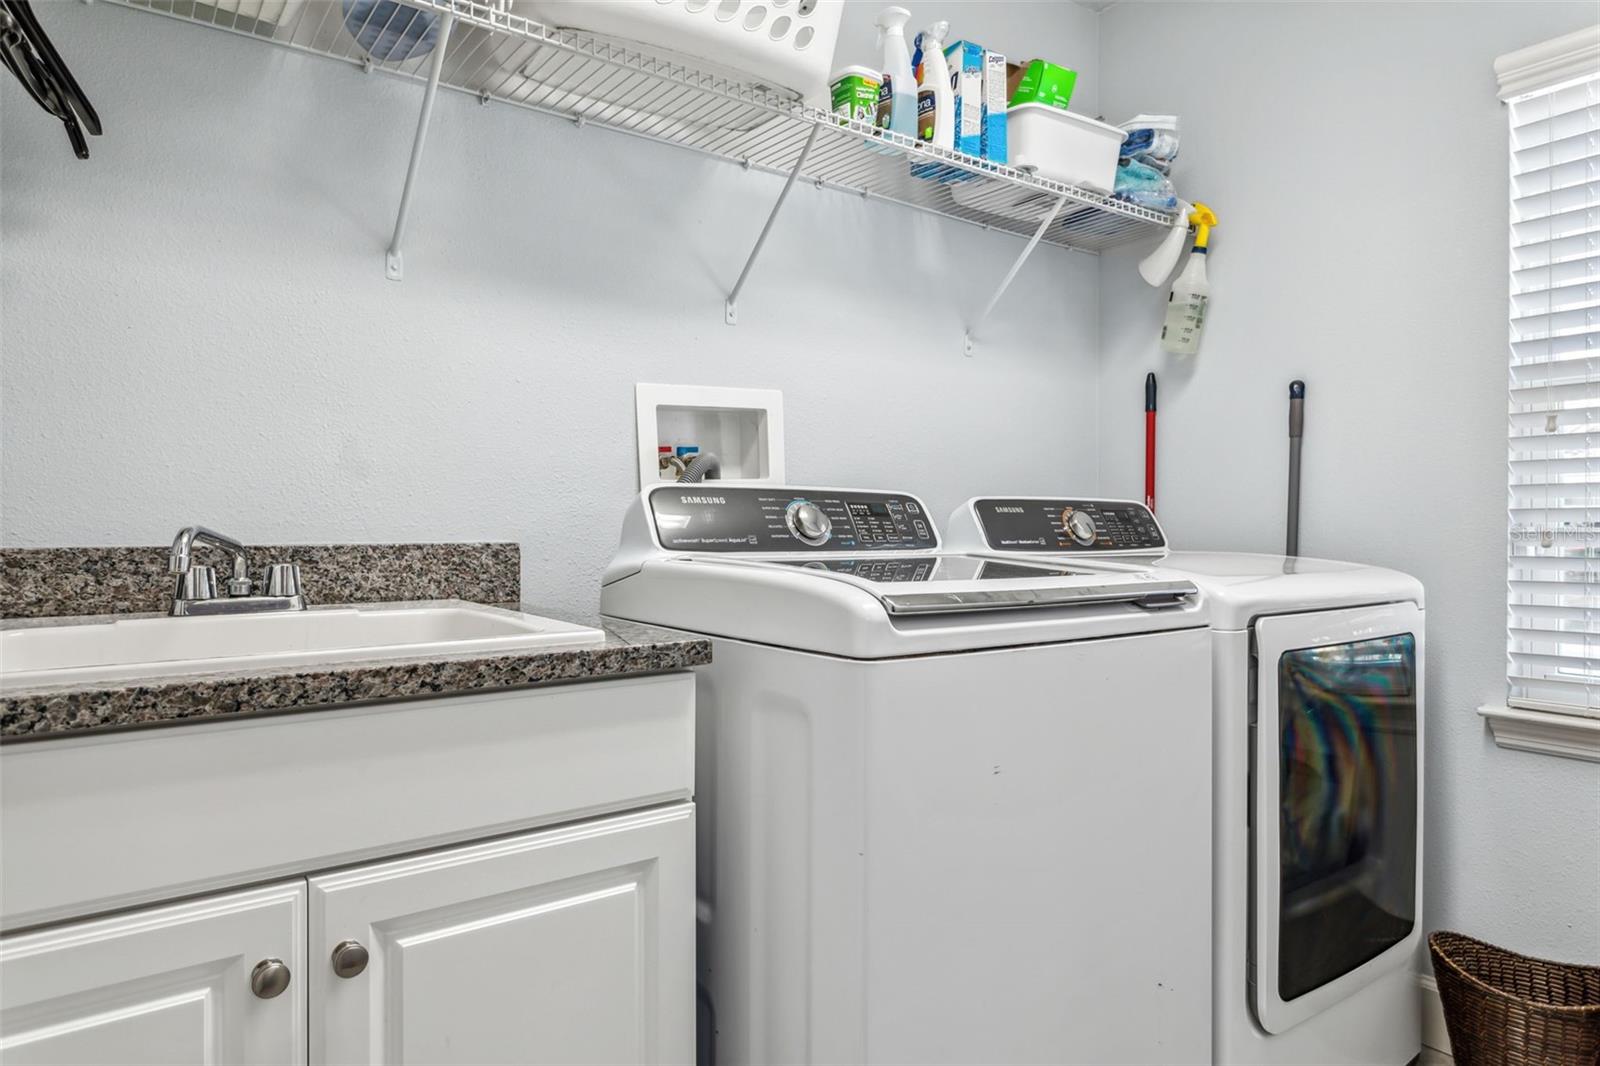 Tucked away laundry room with washer and dryer included!